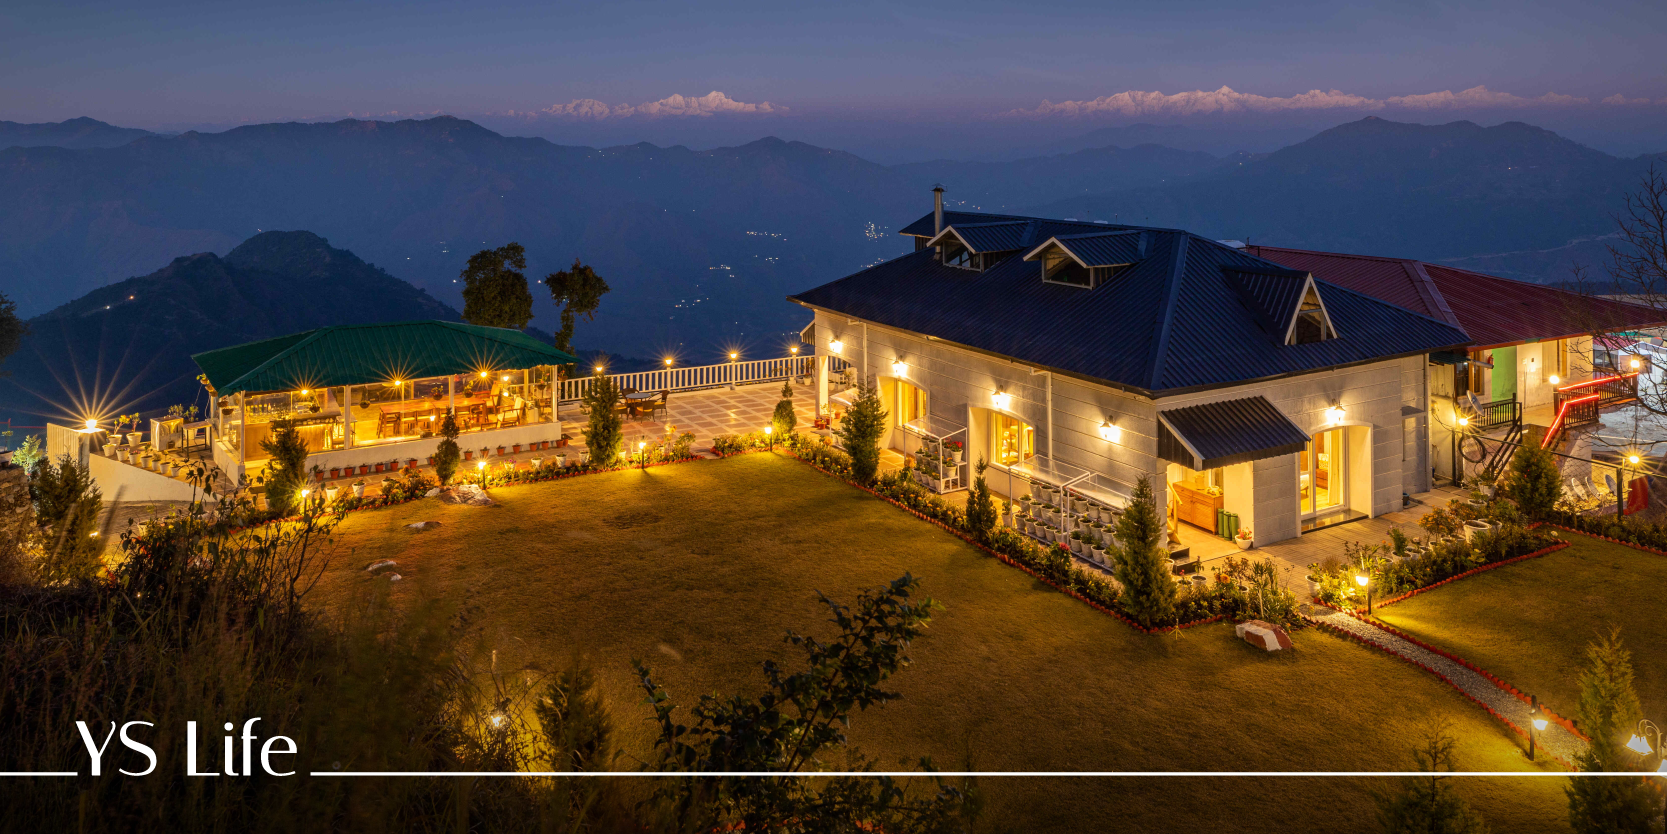 Barefoot Bungalow, a luxury holiday home in the lap of the Himalayas